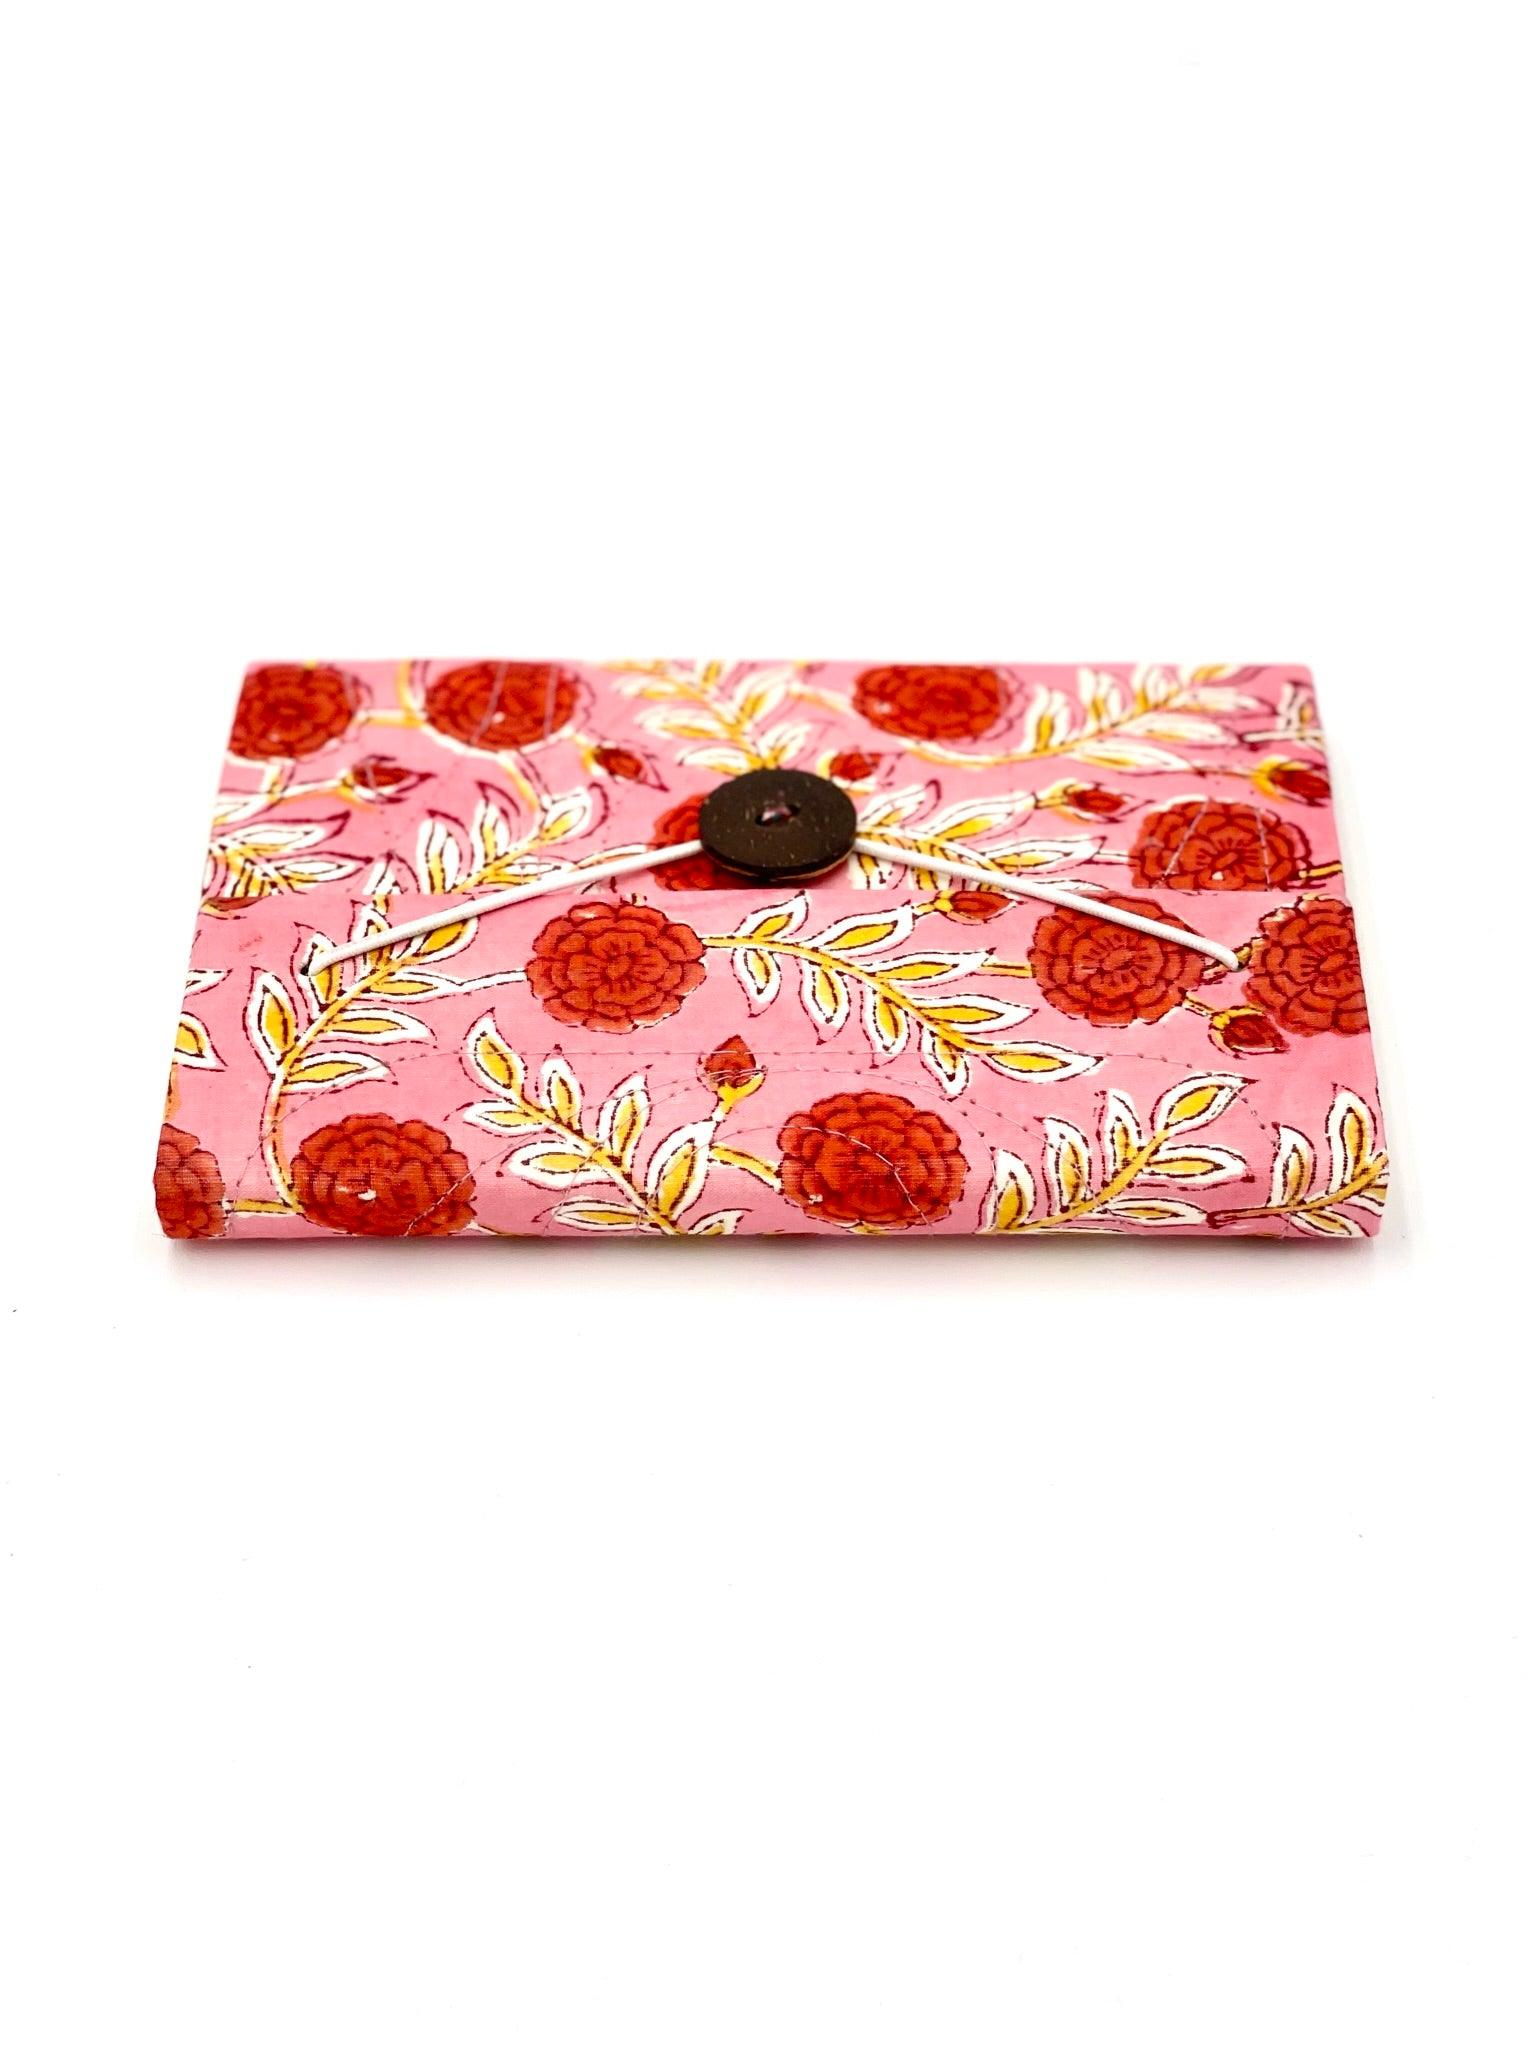 Block Print Journal/Notebook, Pink Dahlia Floral - Unlined, 100 Pages, Thick Paper, Hard Cover - Transcend